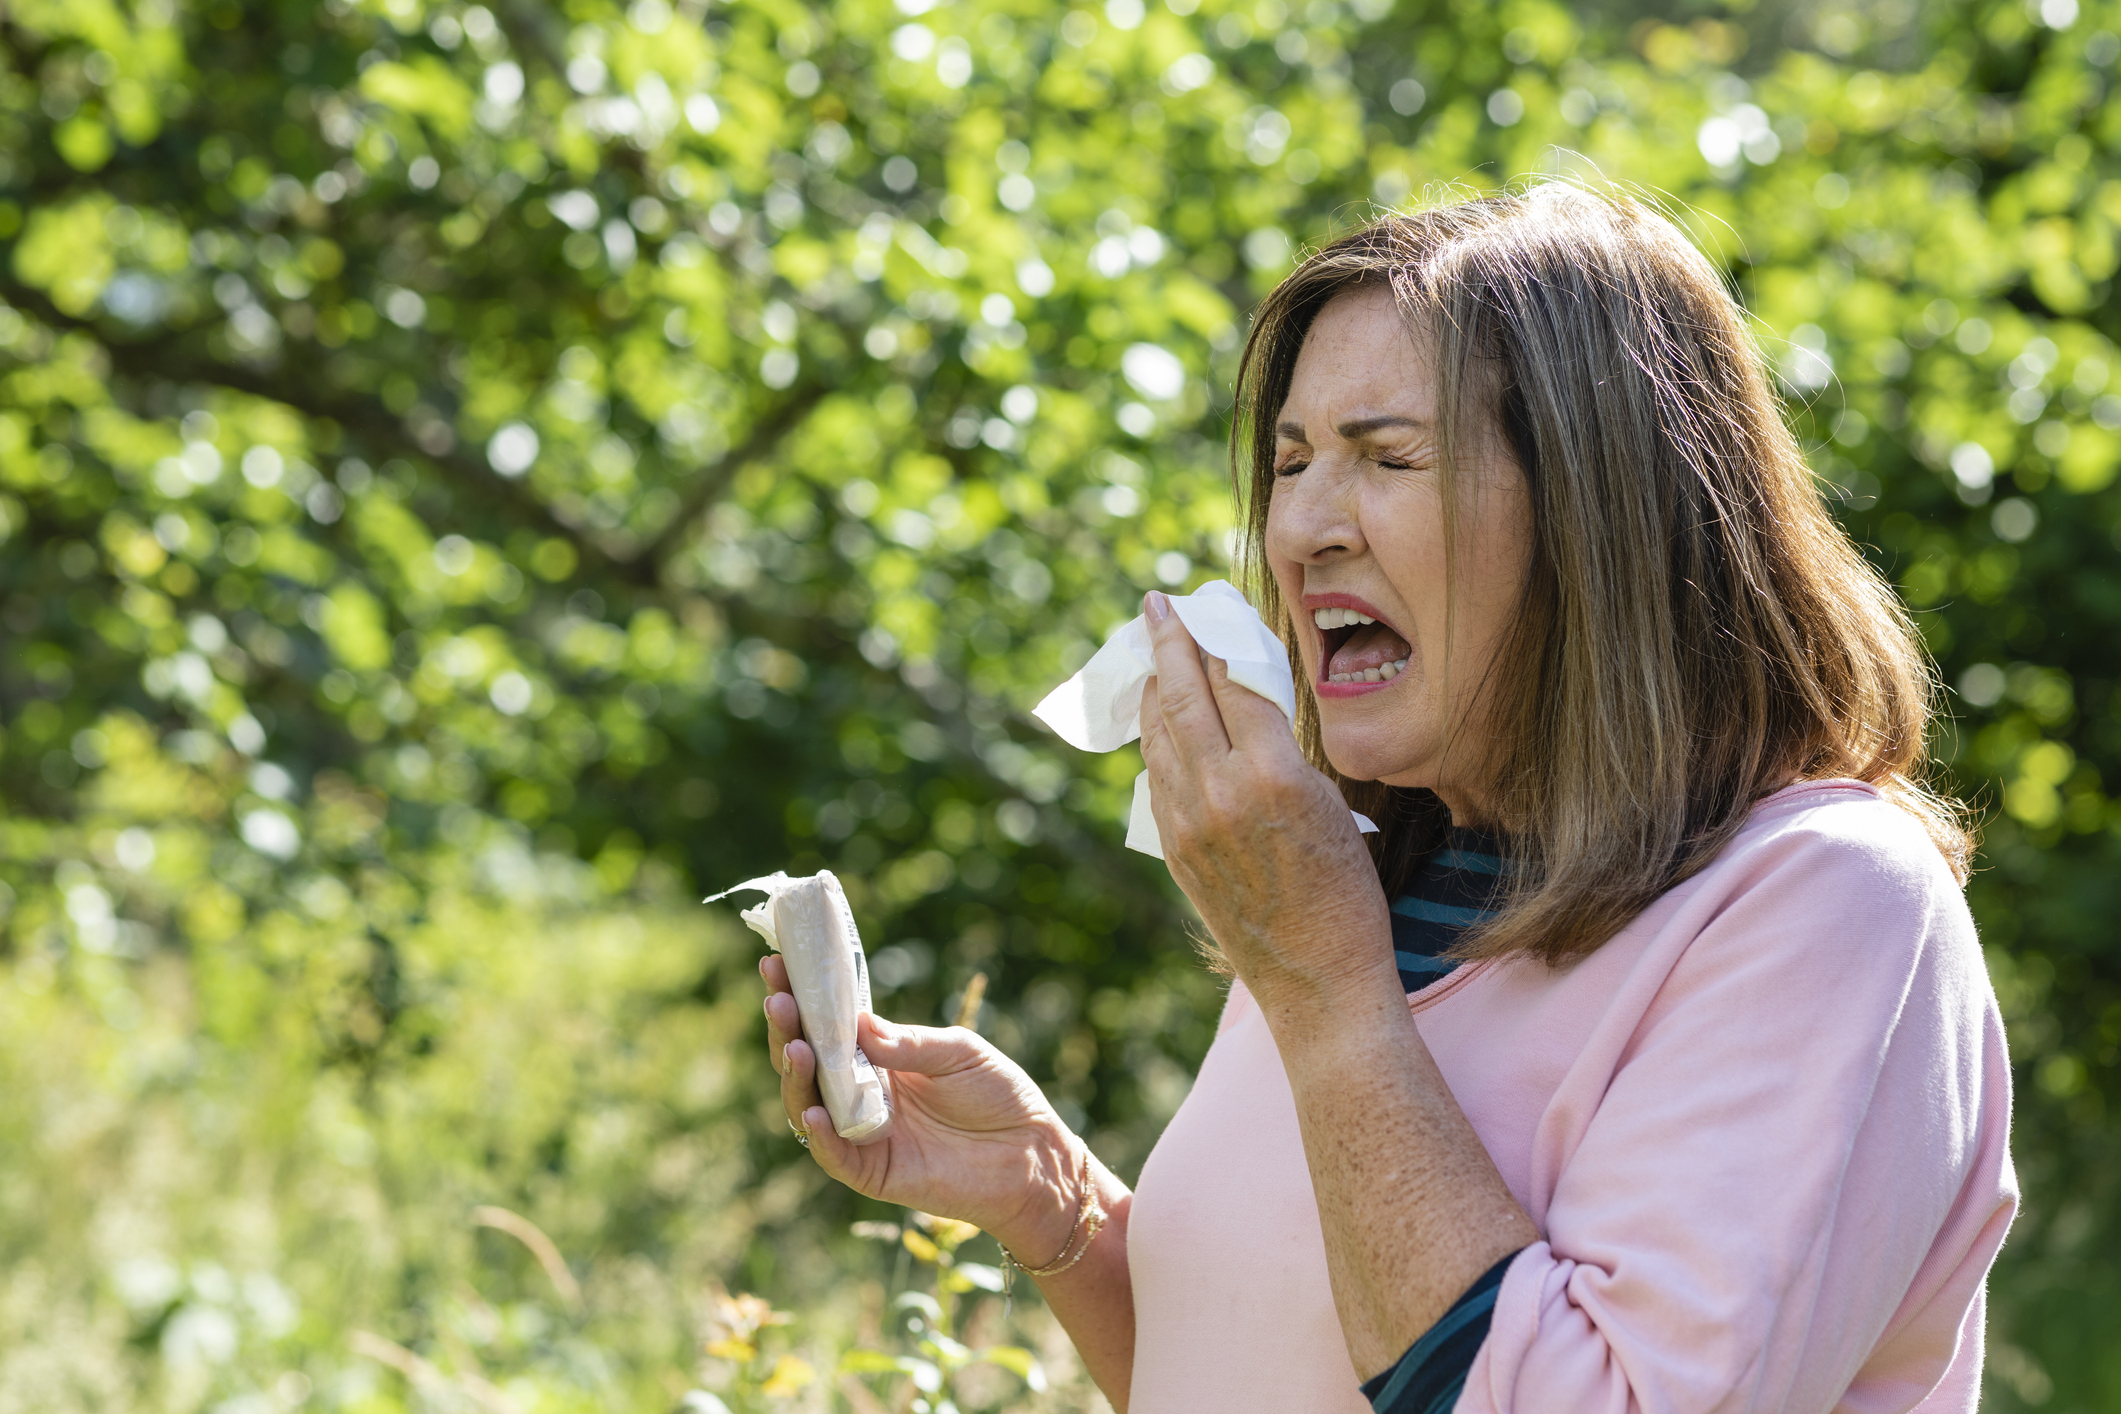 Top Three Tips to Reducing Allergens This Spring